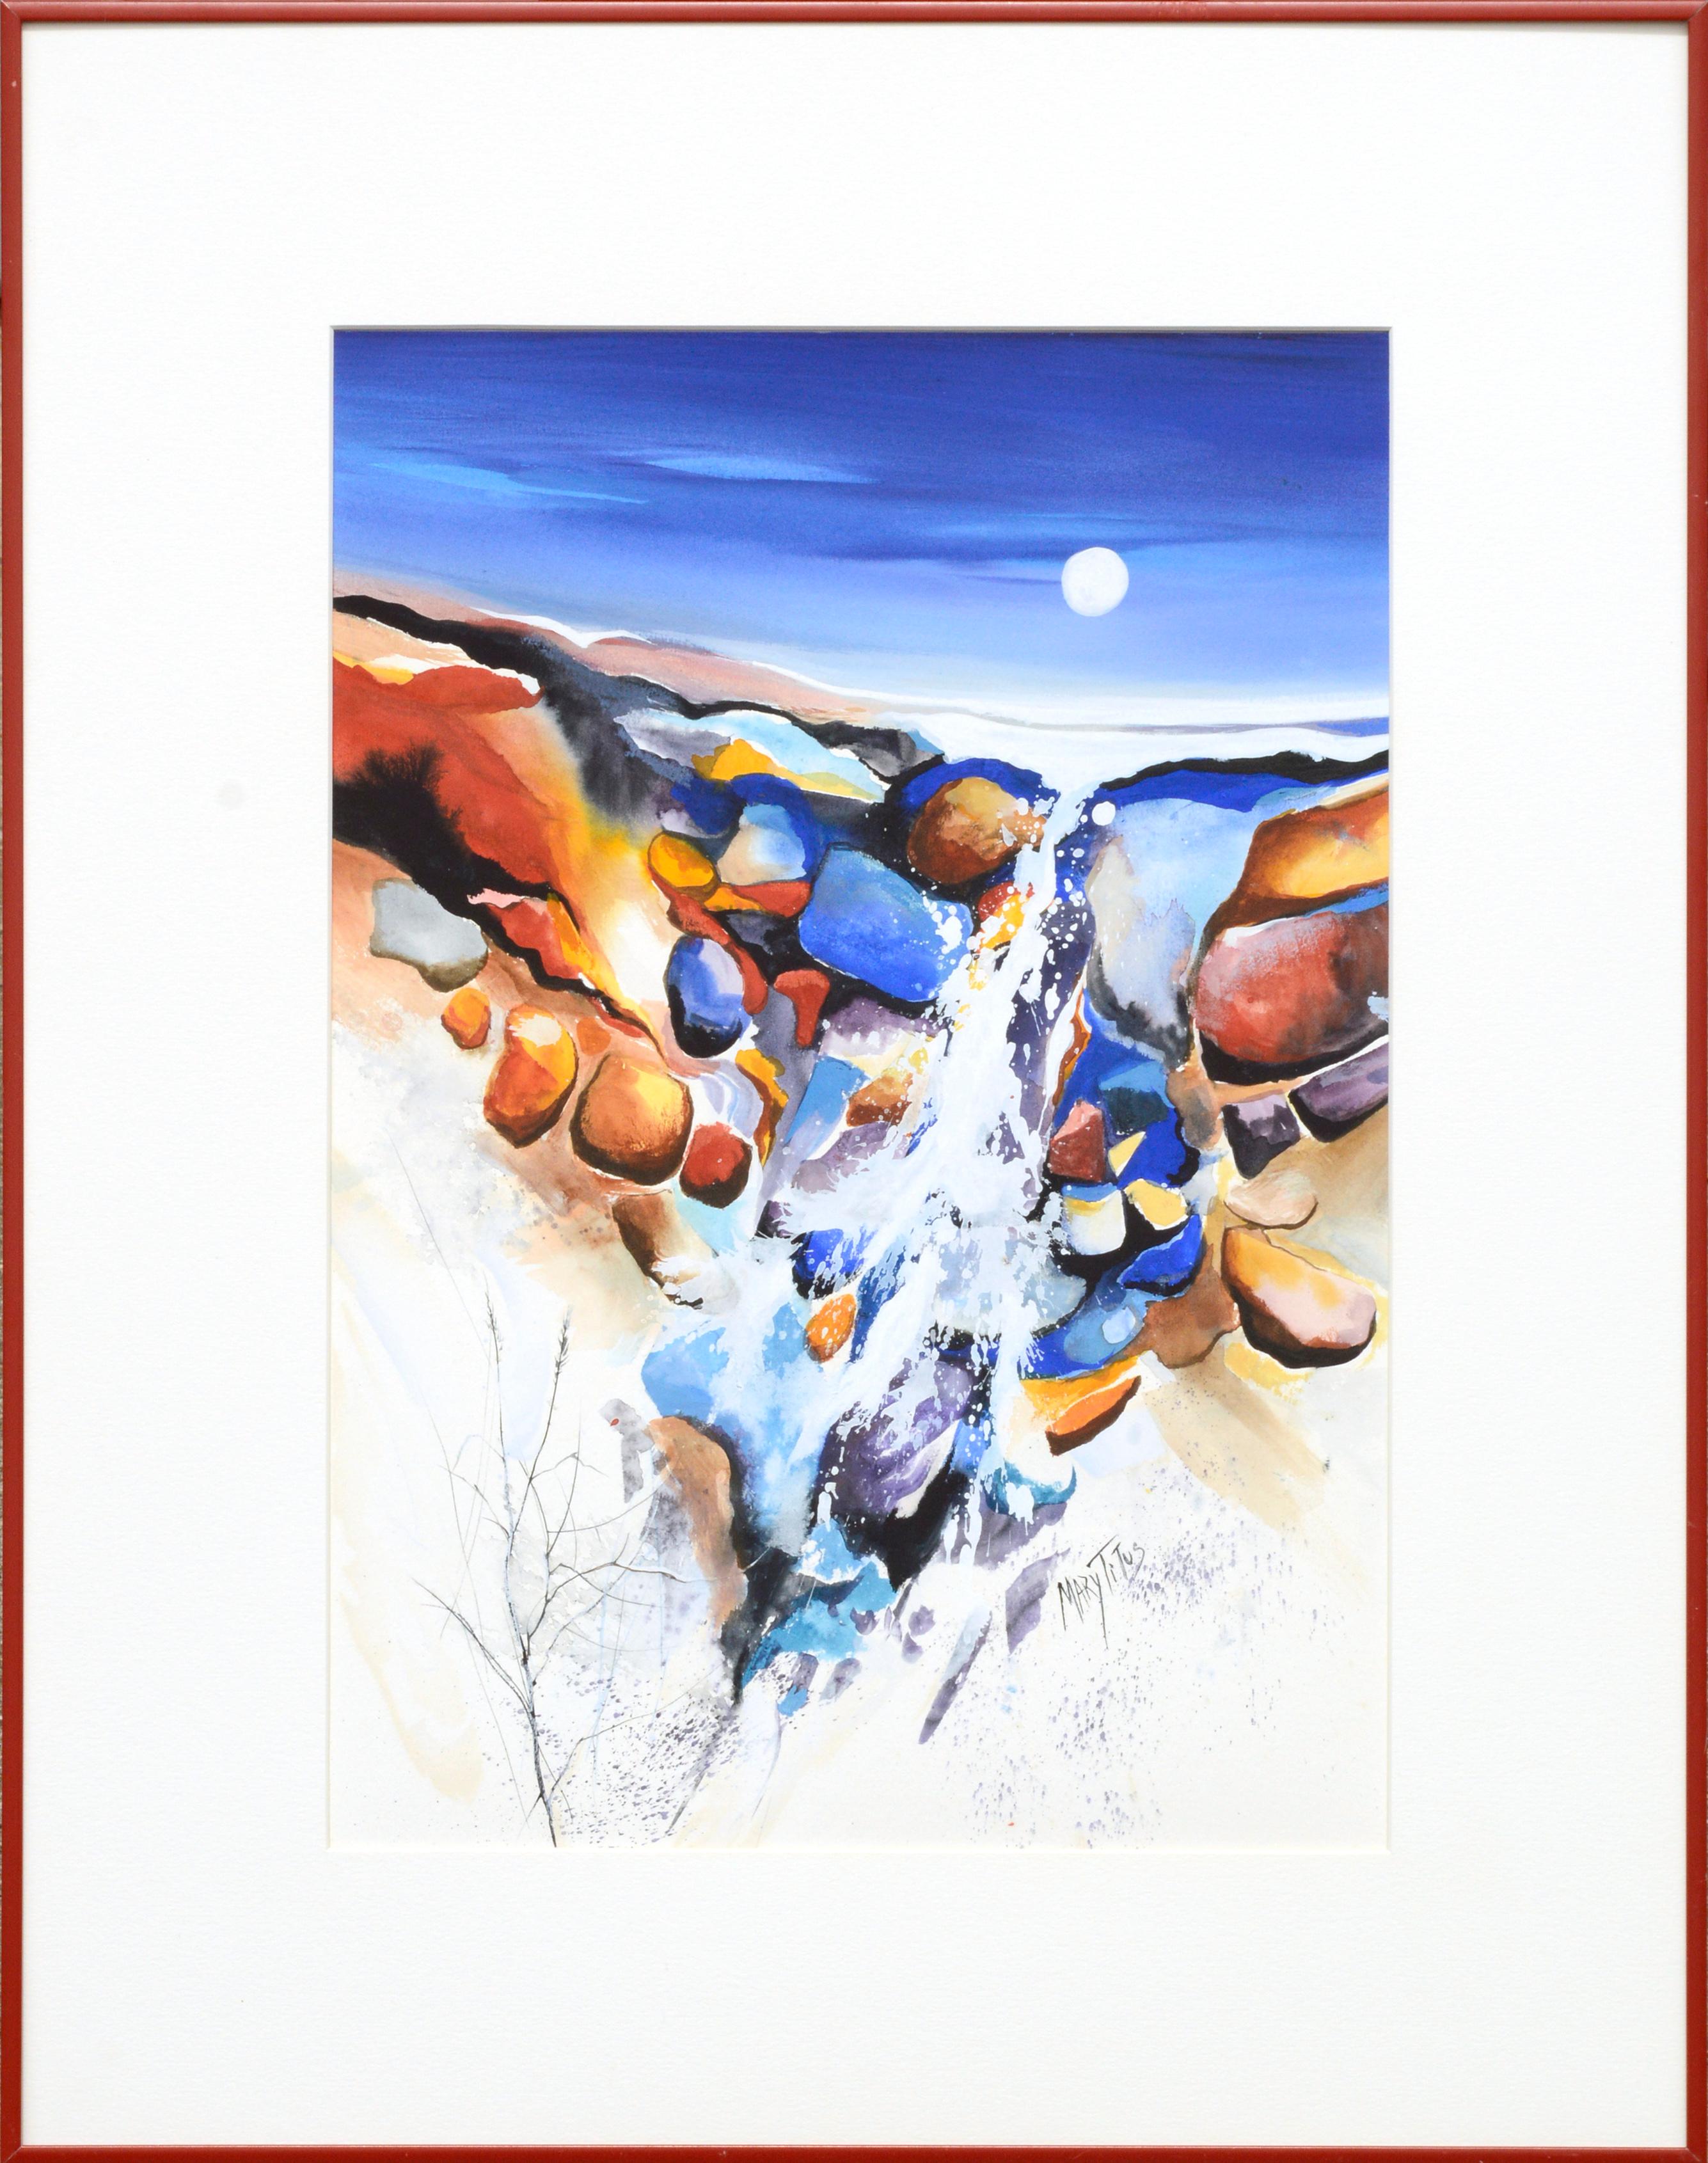 Mary Titus Abstract Painting - Surrealist Waterfall / Abstracted Hillside Landscape on Verso - Double Sided 